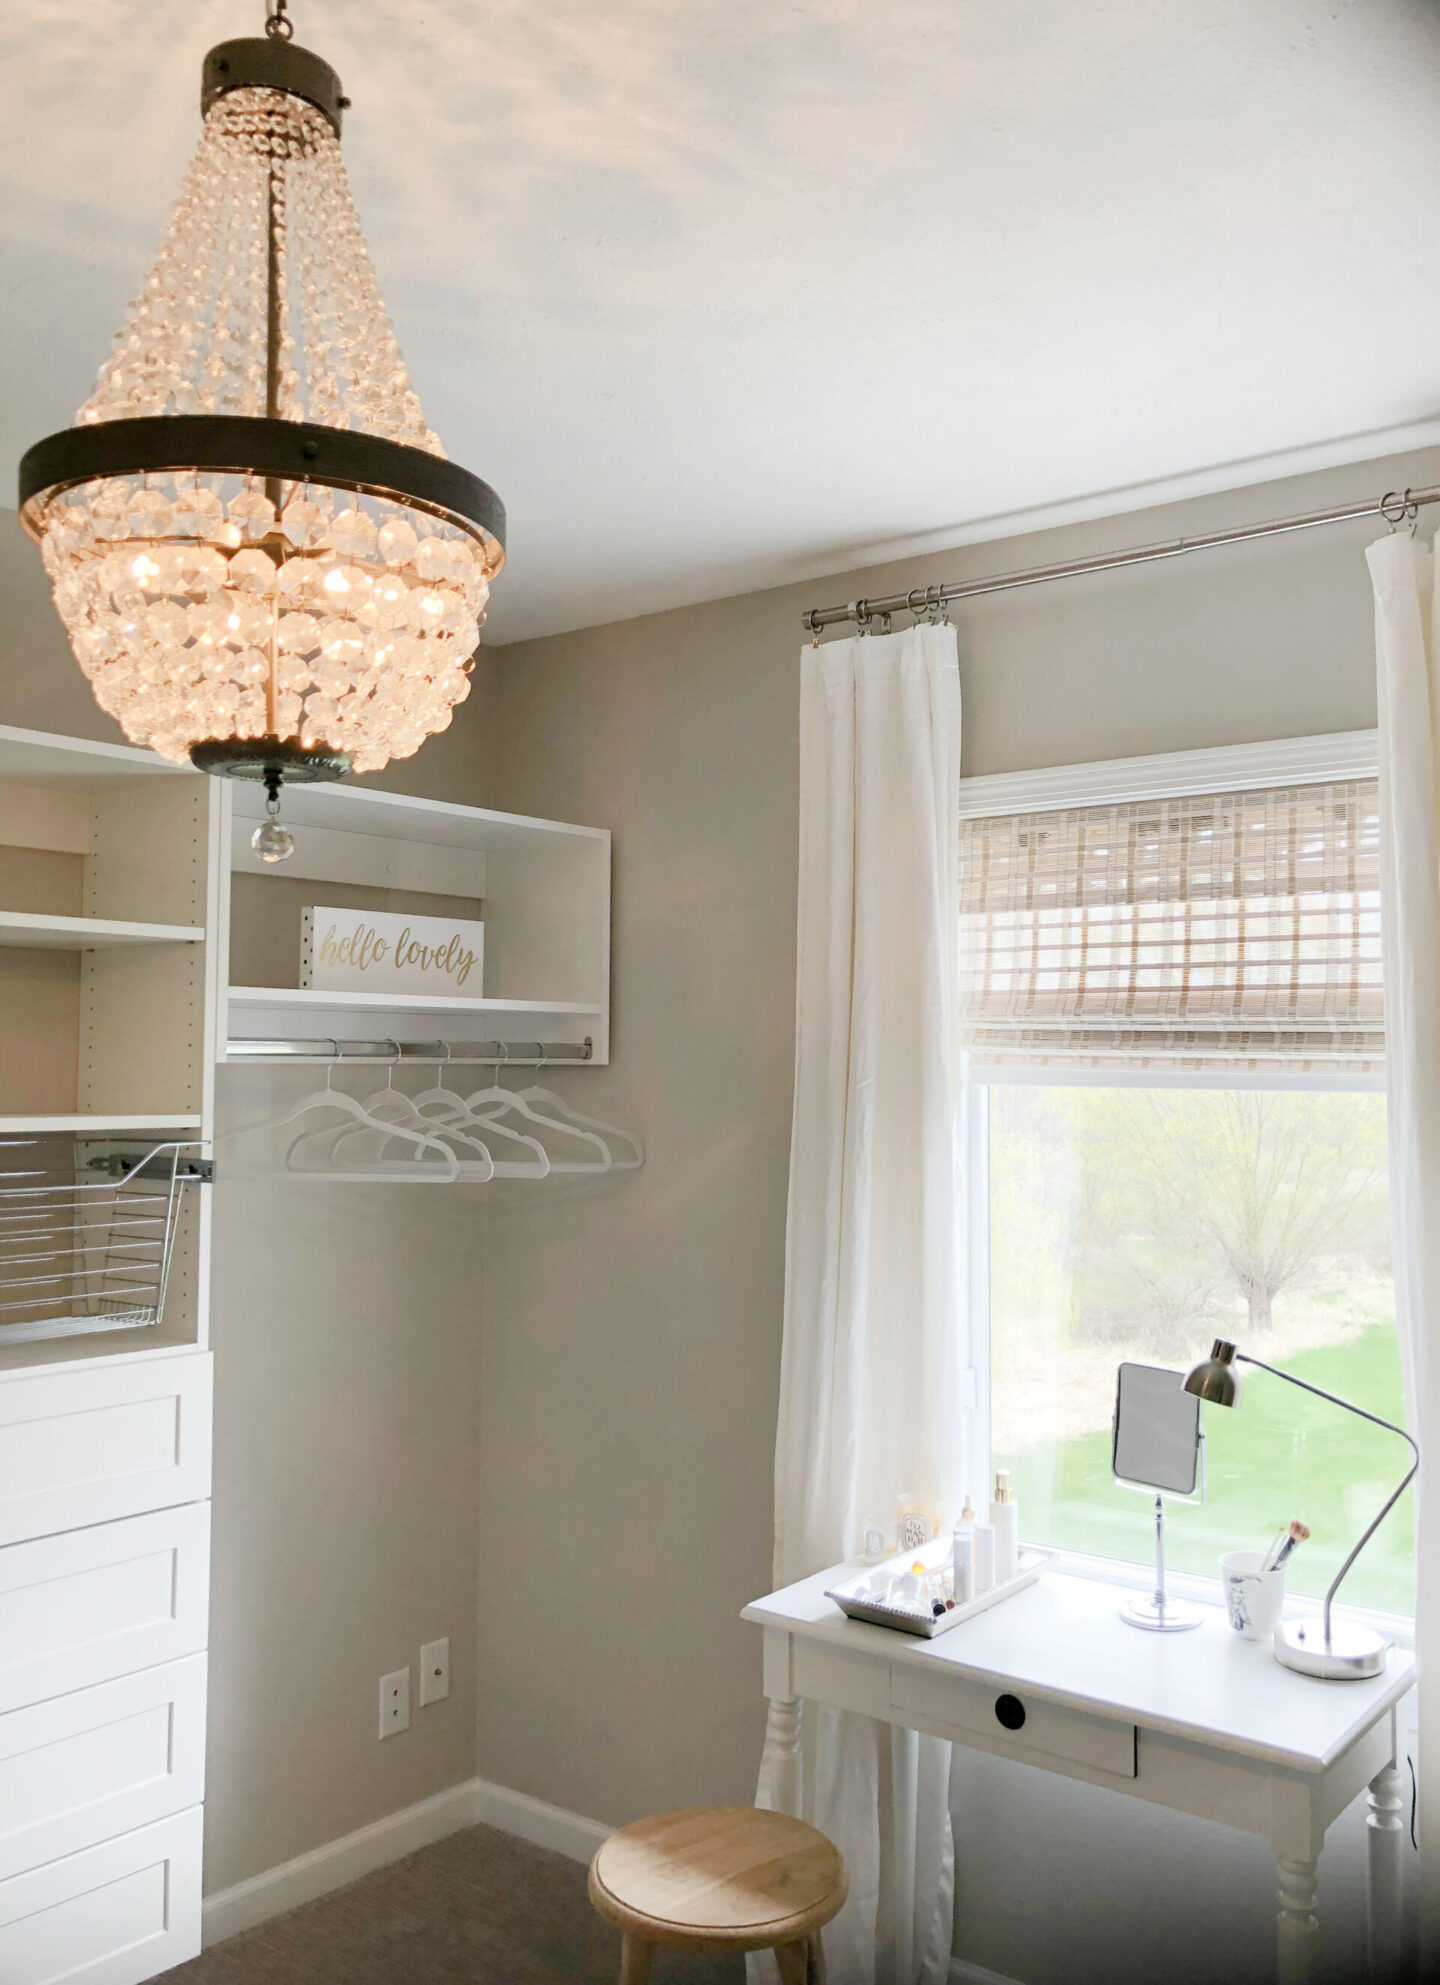 Crystal chandelier, closet system from Modular Closets, and a vintage desk transformed an awkward little bedroom into an inviting closet, home office, and dressing area - Hello Lovely Studio. #cloffice #homeoffices #diycloset